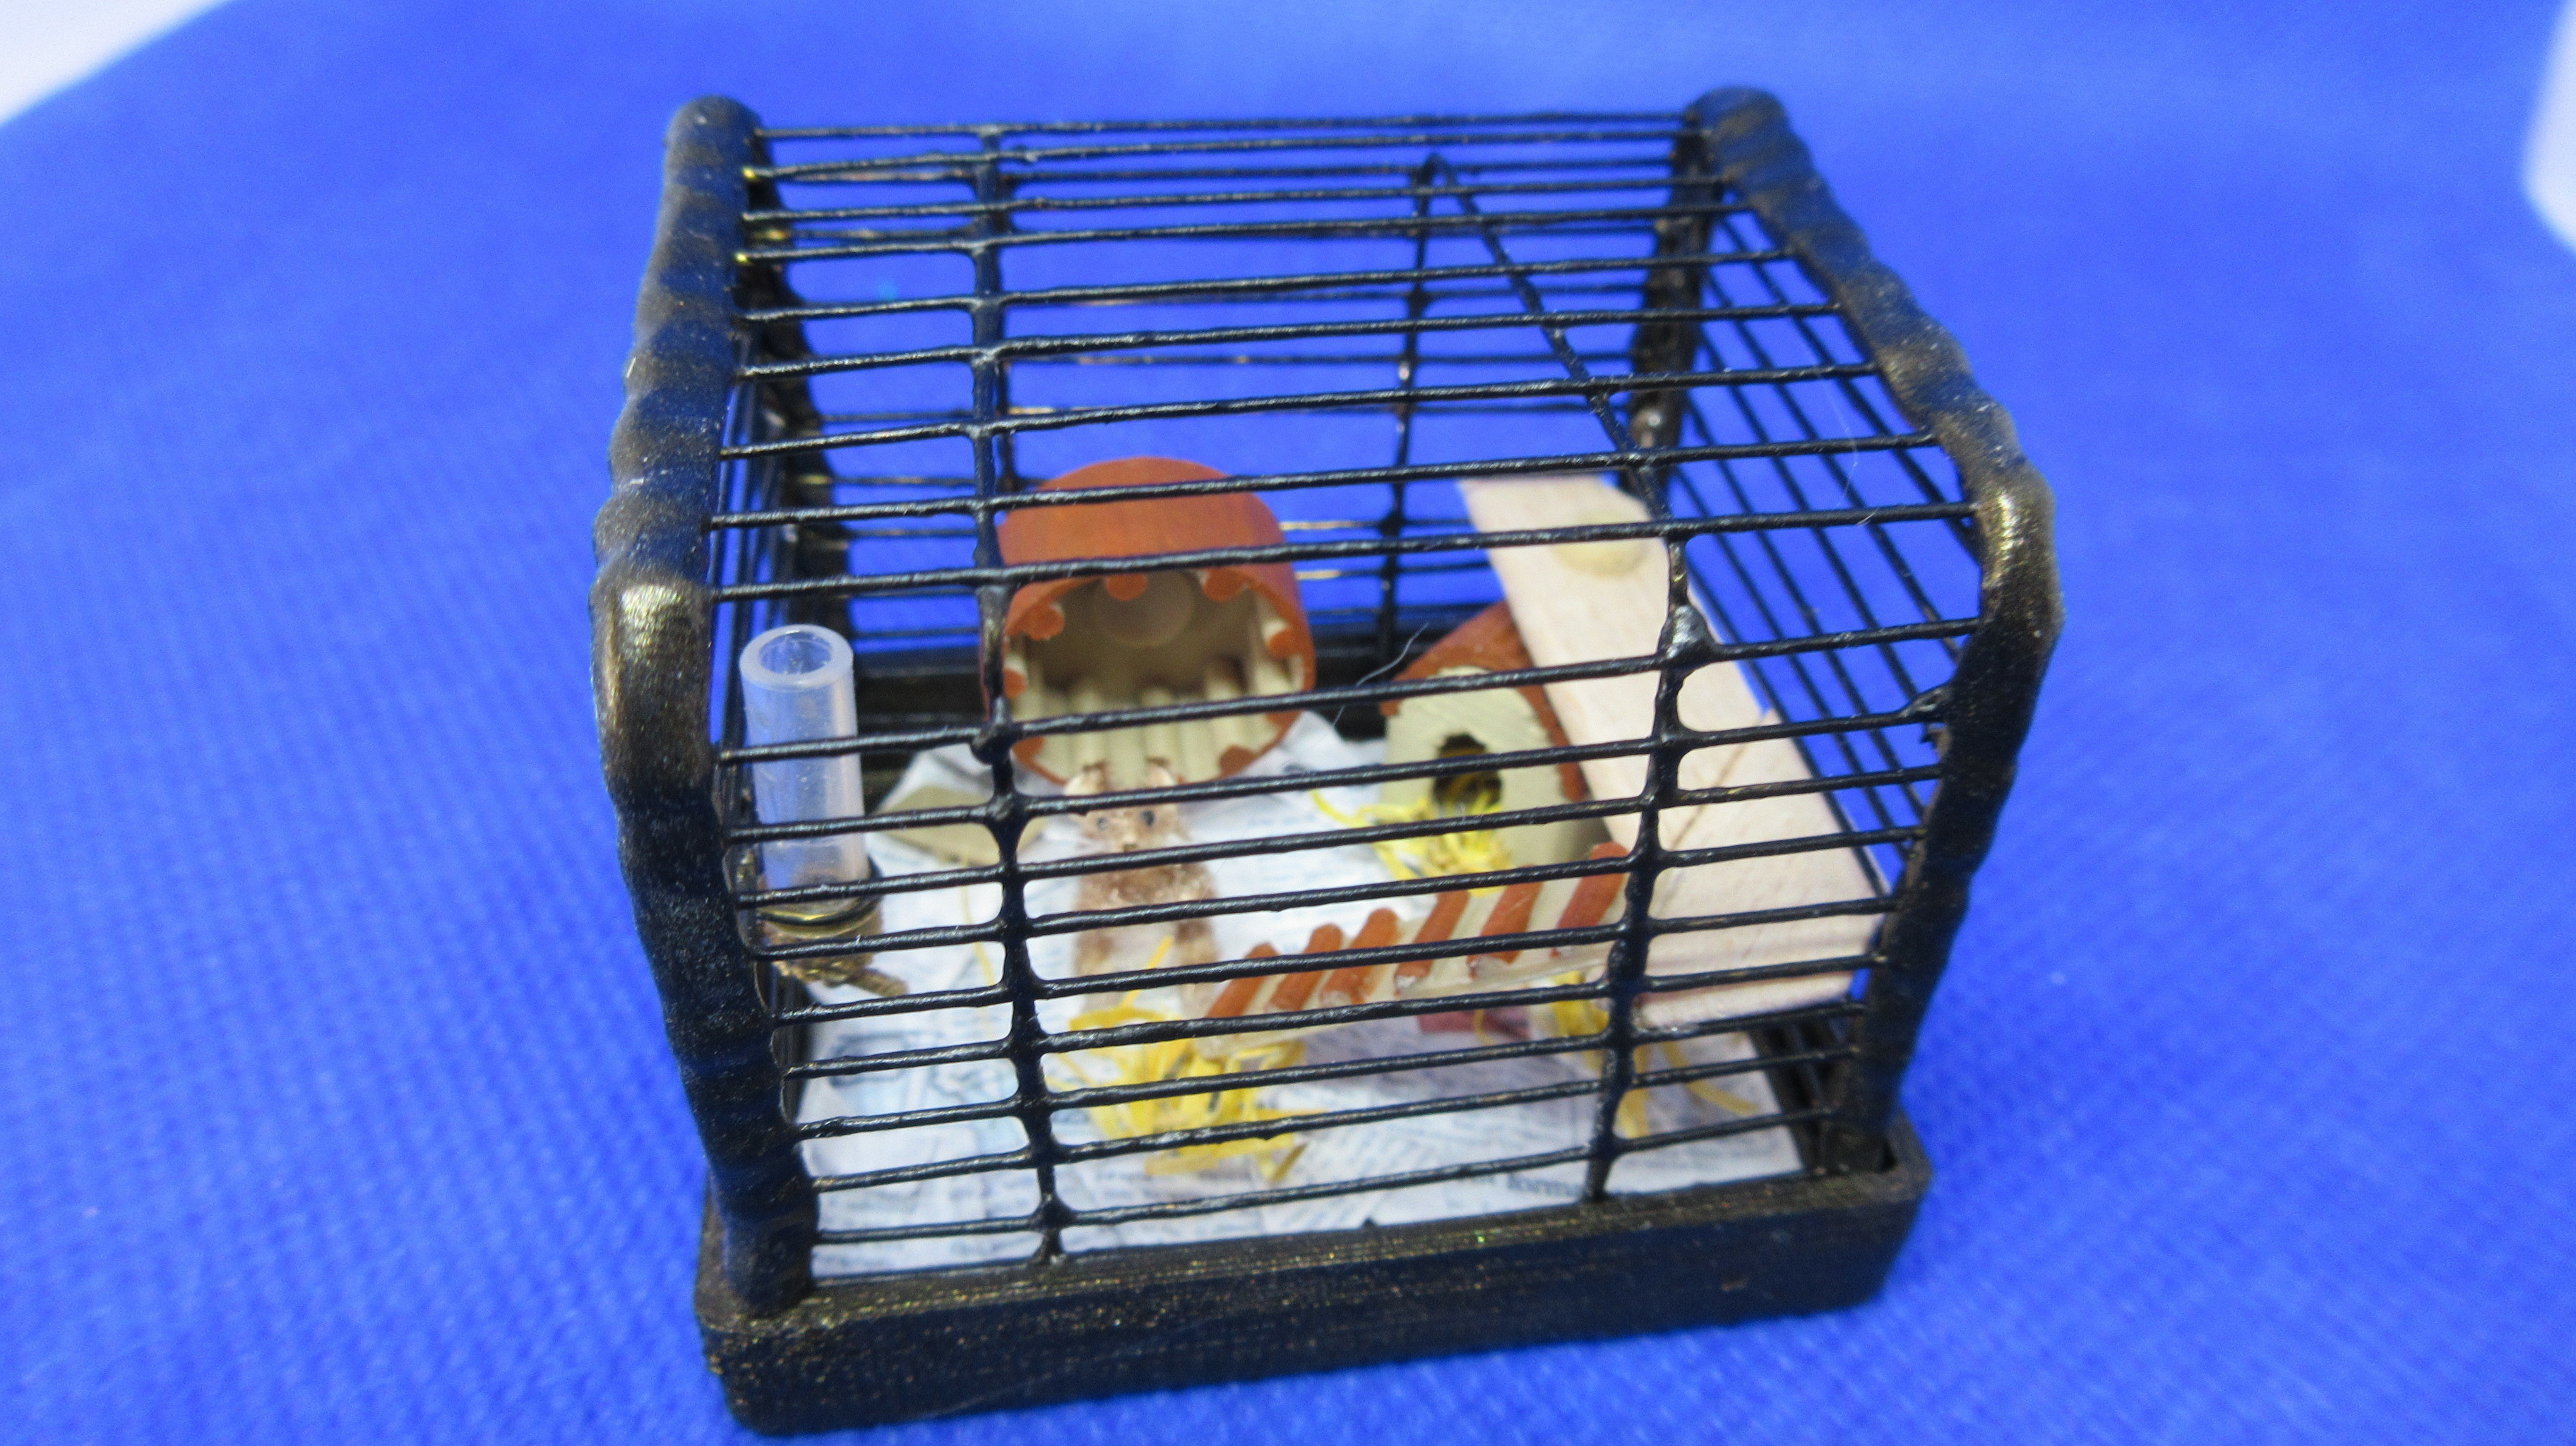 3d printed hamster house